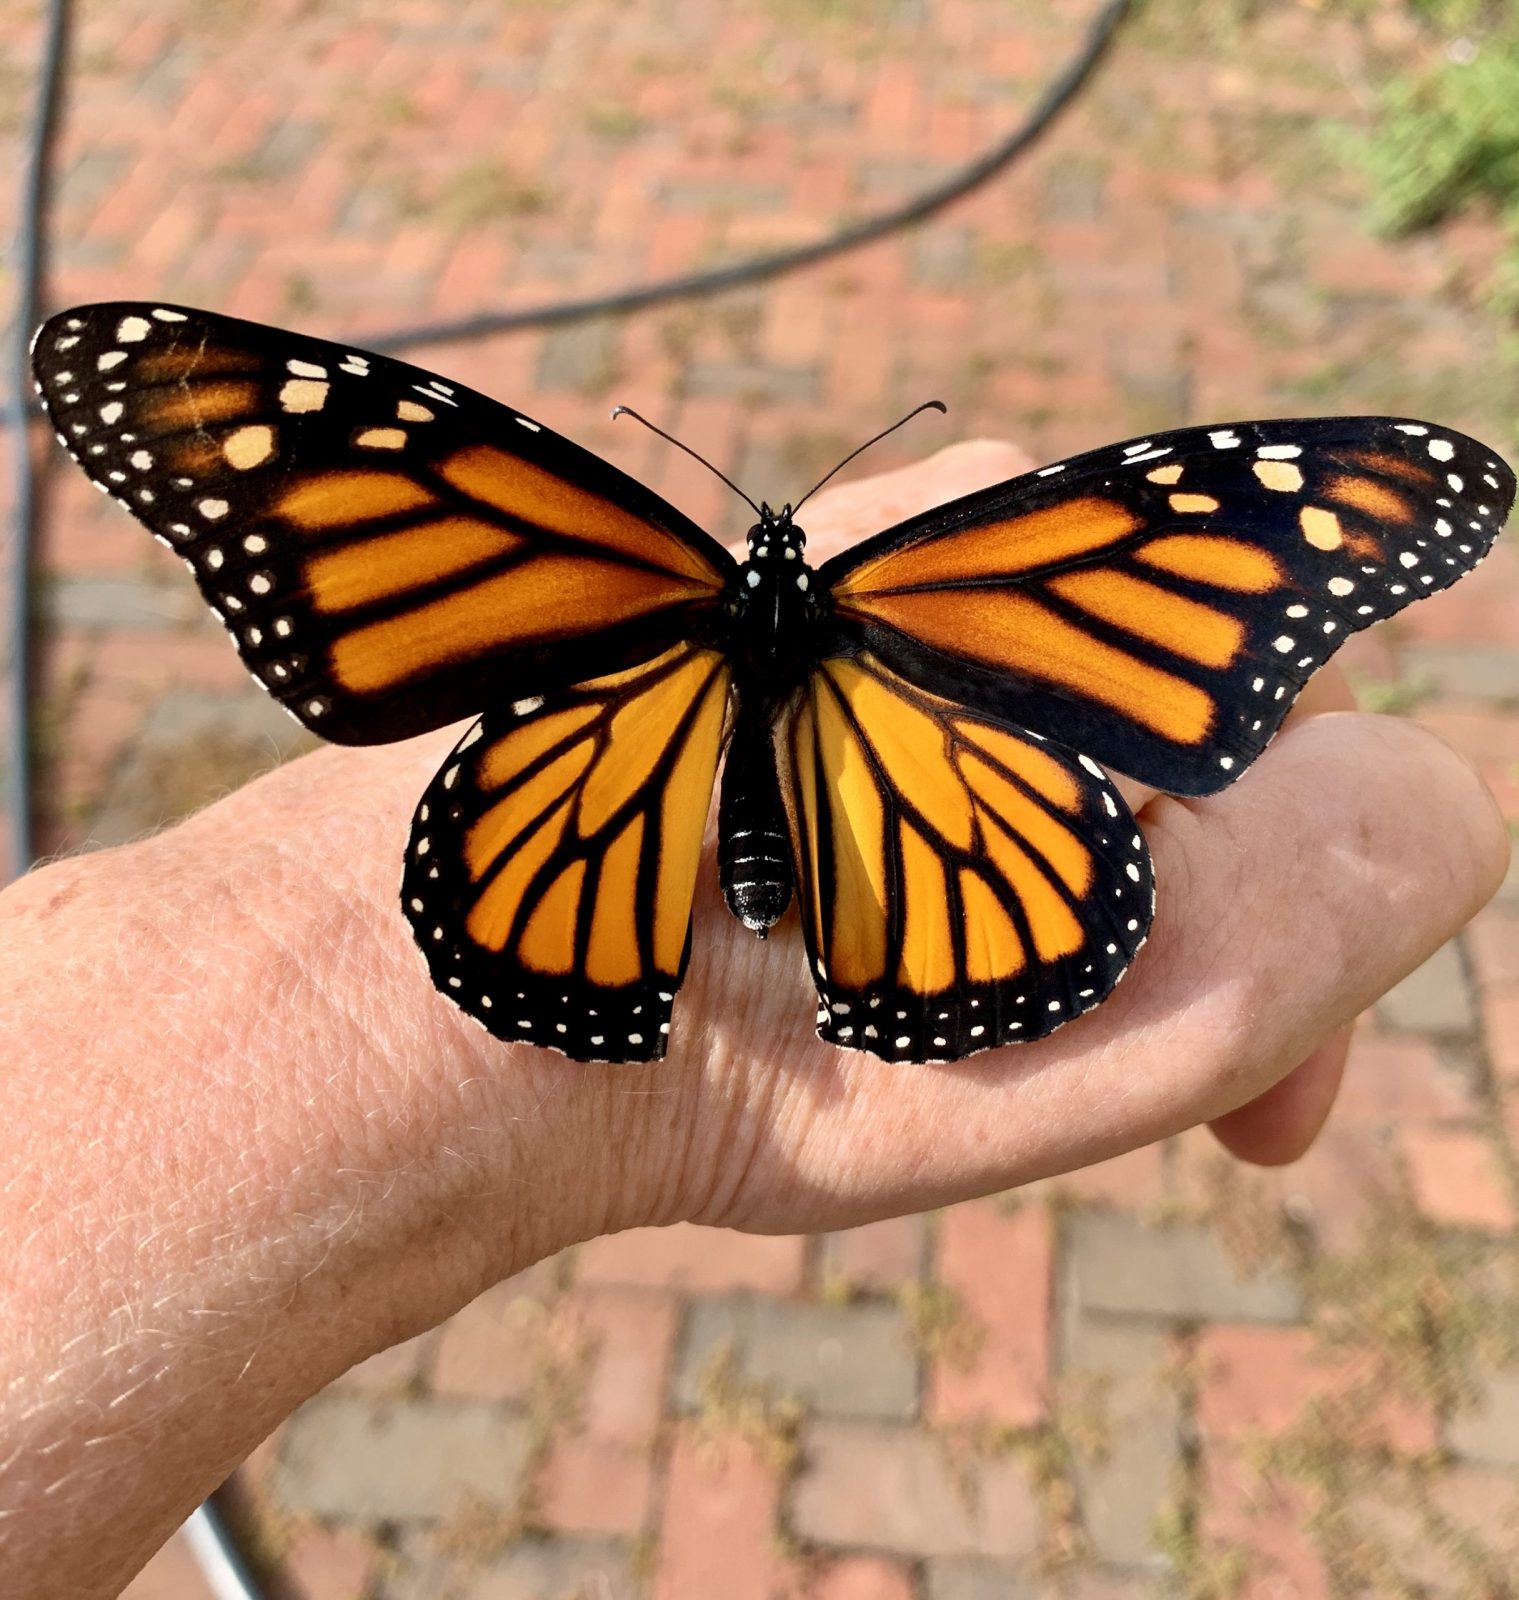 Monarchs are mythical and mysterious